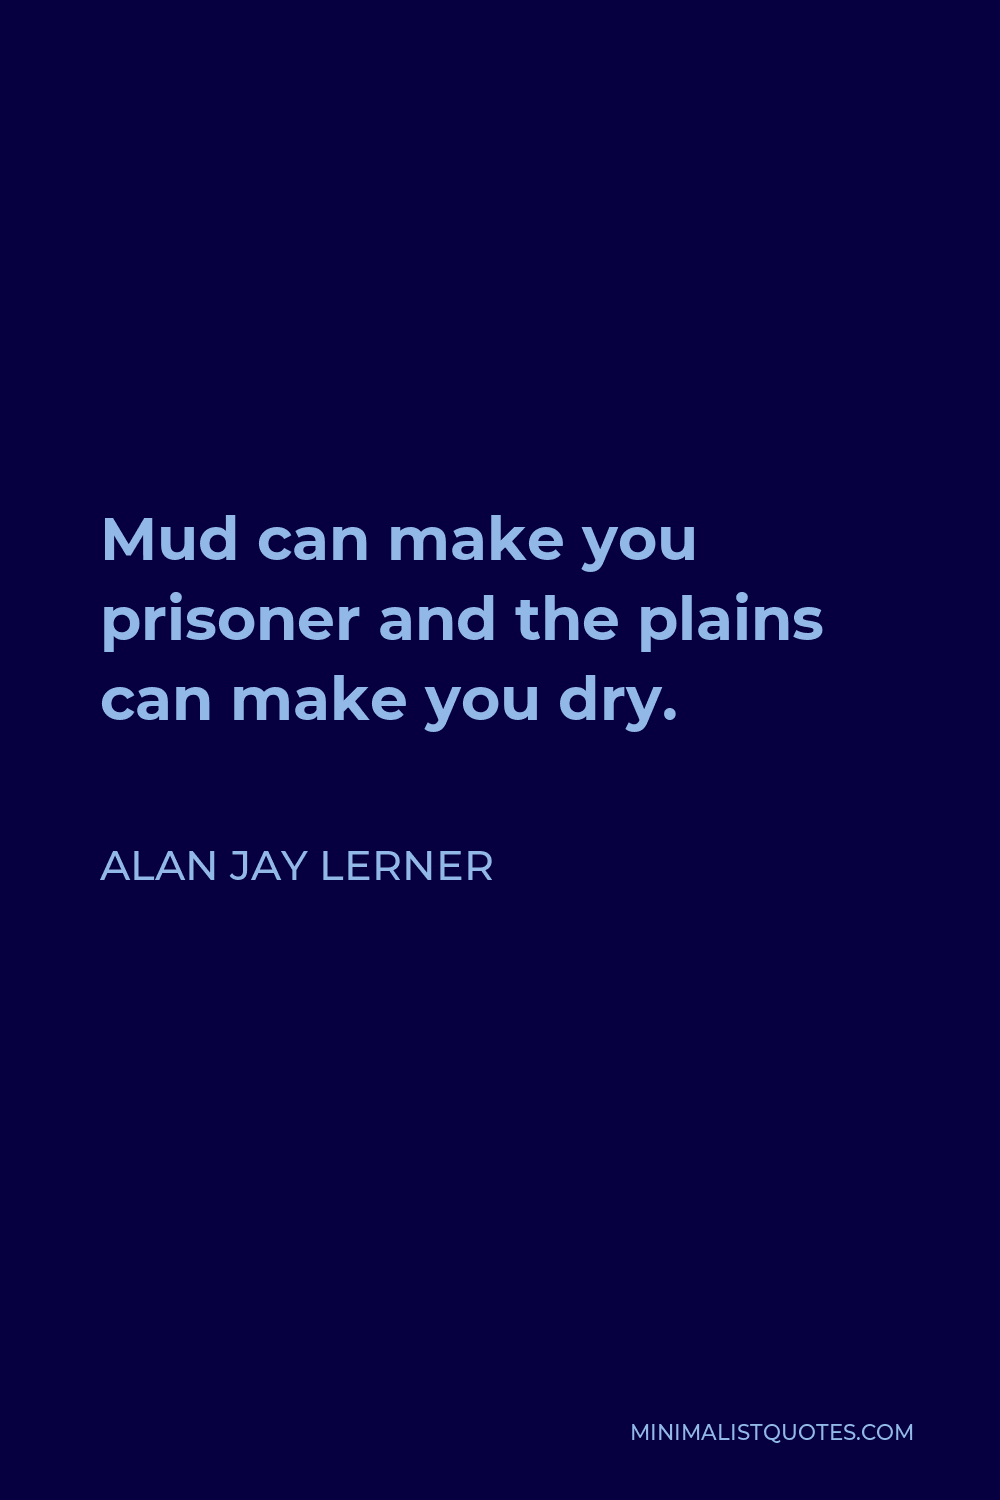 Alan Jay Lerner Quote - Mud can make you prisoner and the plains can make you dry.